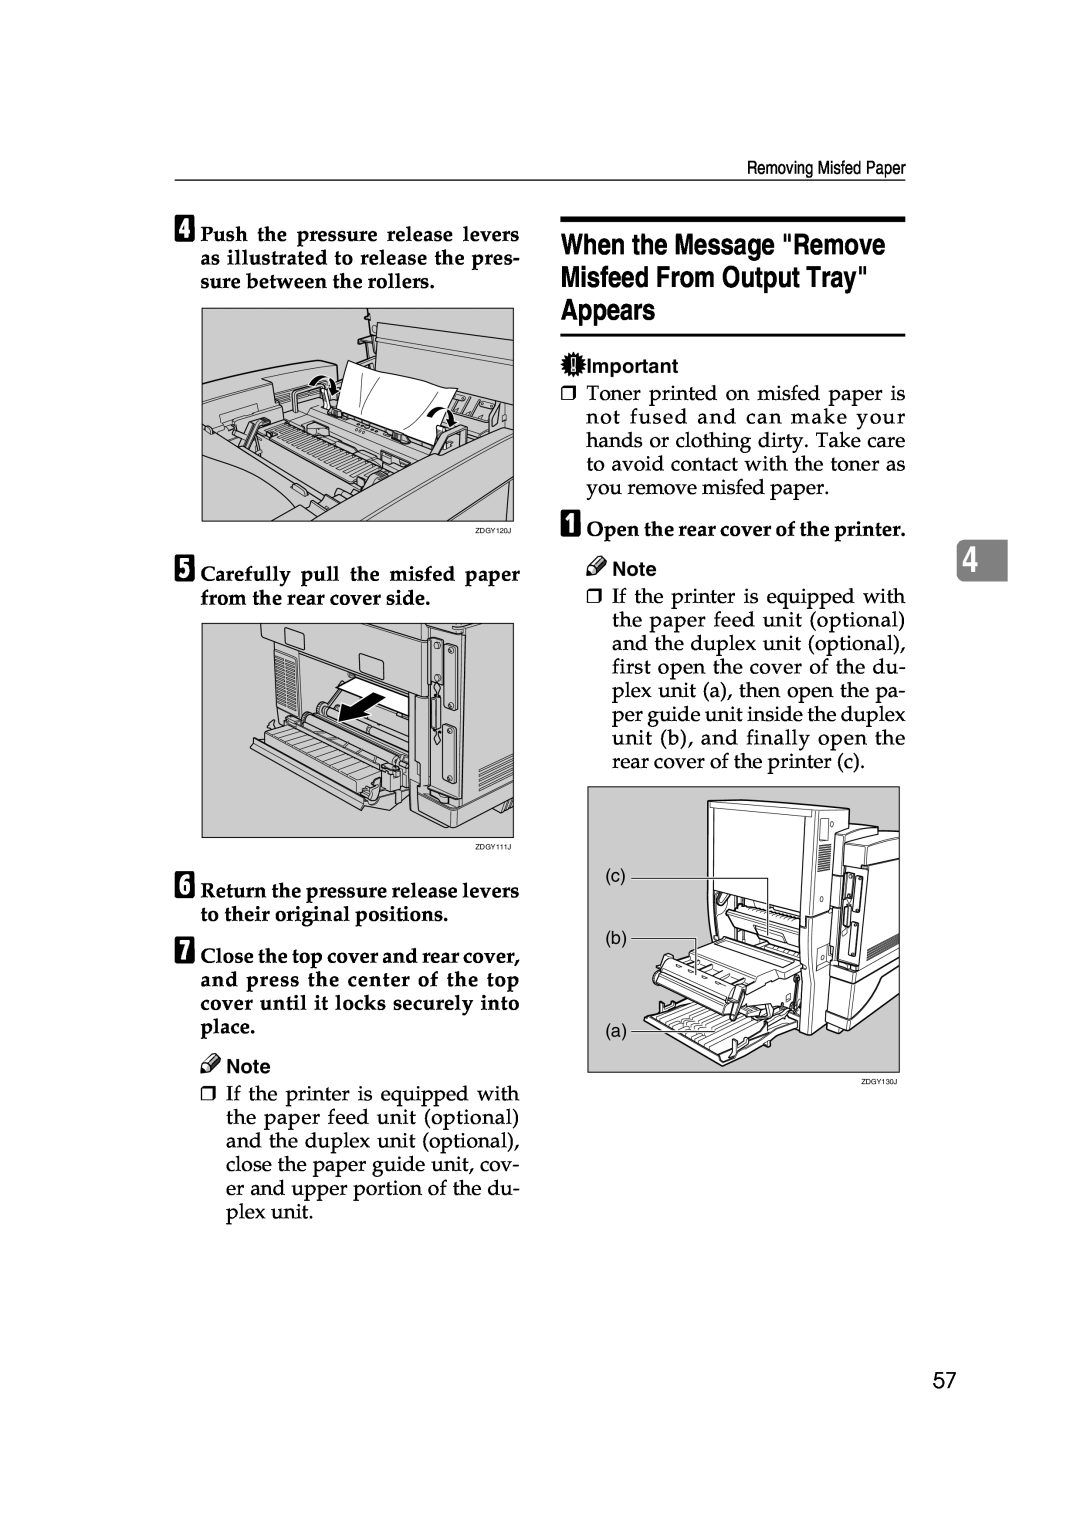 Lanier AP206 manual When the Message Remove Misfeed From Output Tray Appears, A Open the rear cover of the printer 